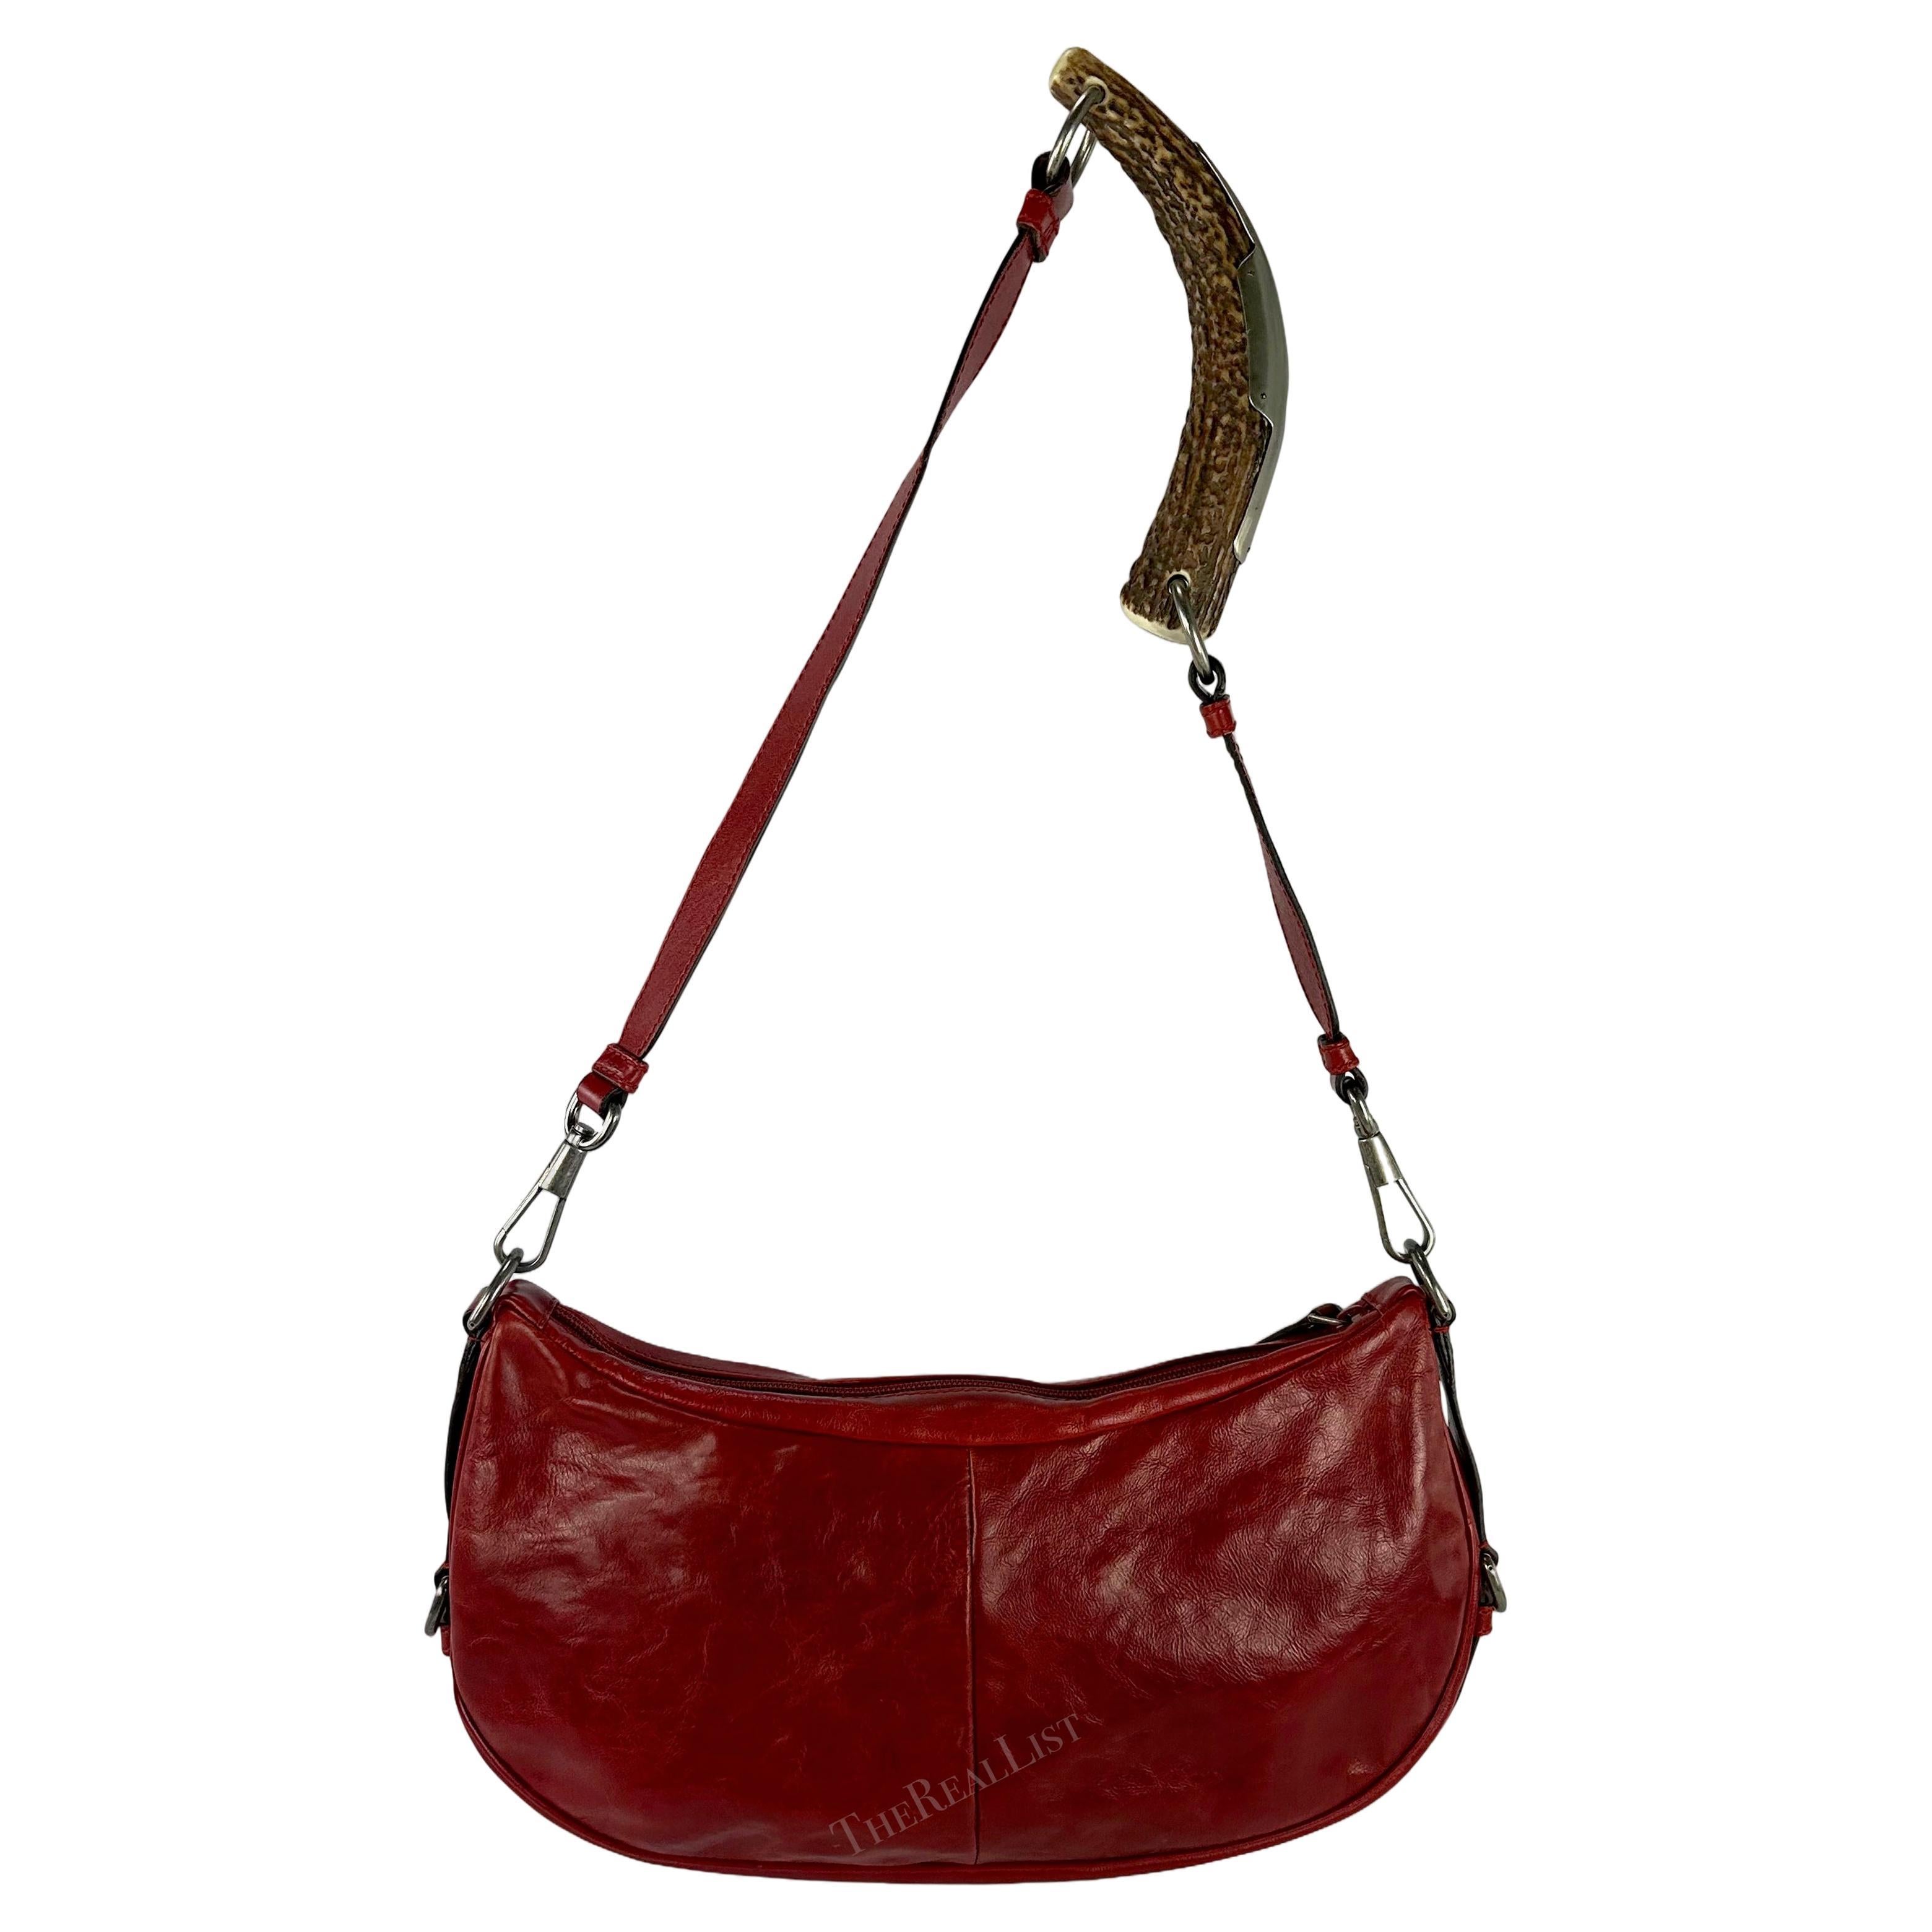 2000s Yves Saint Laurent by Tom Ford Red Leather Mombassa Shoulder Bag For Sale